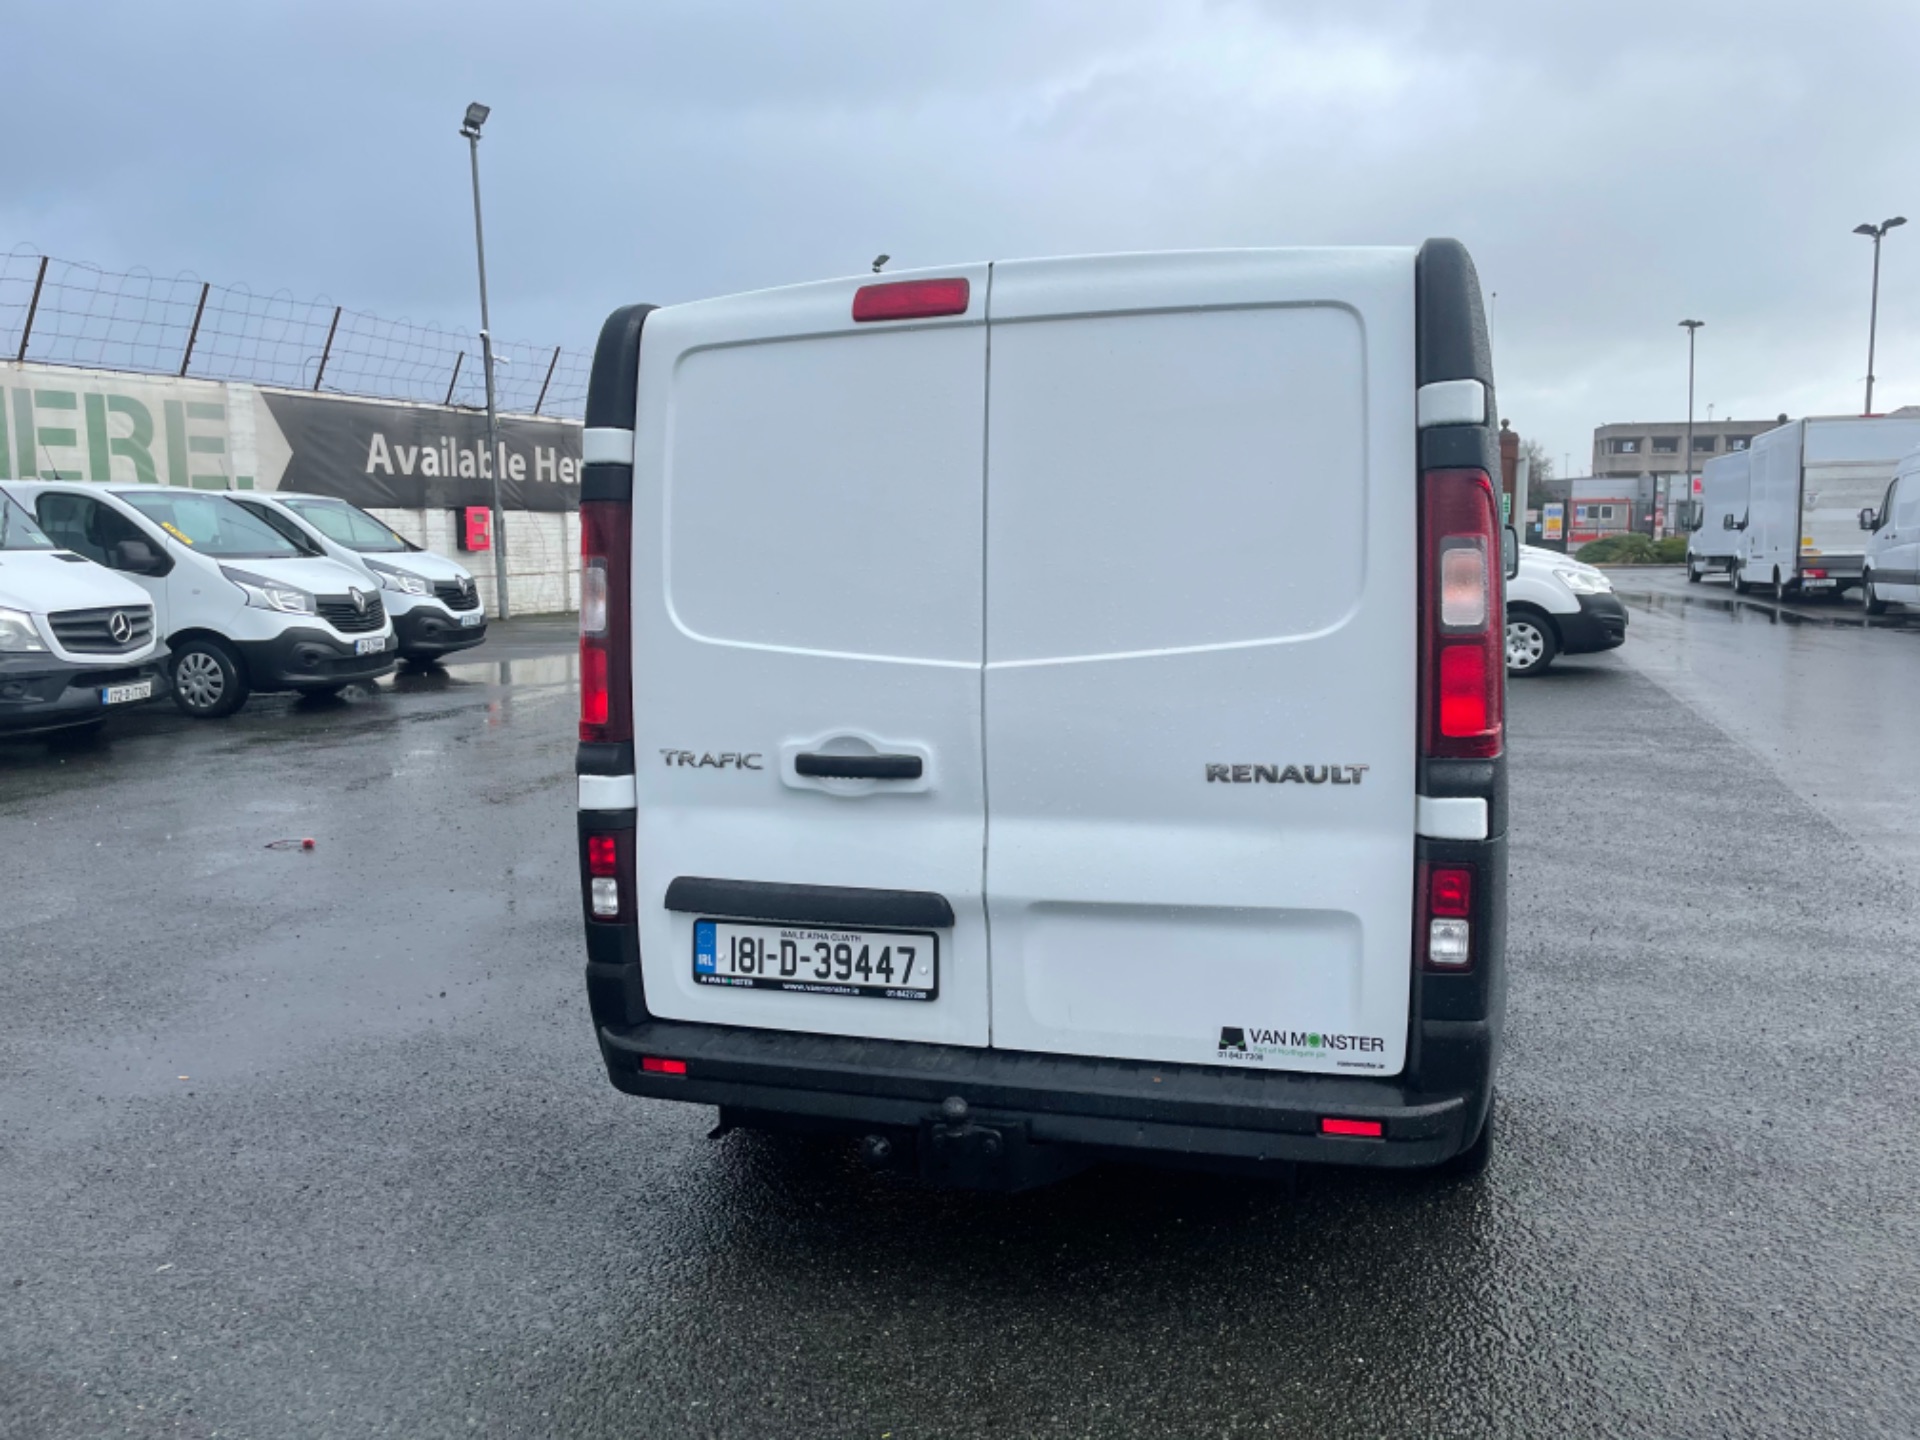 2018 Renault Trafic LL29 DCI 120 Business 3DR (181D39447) Thumbnail 6